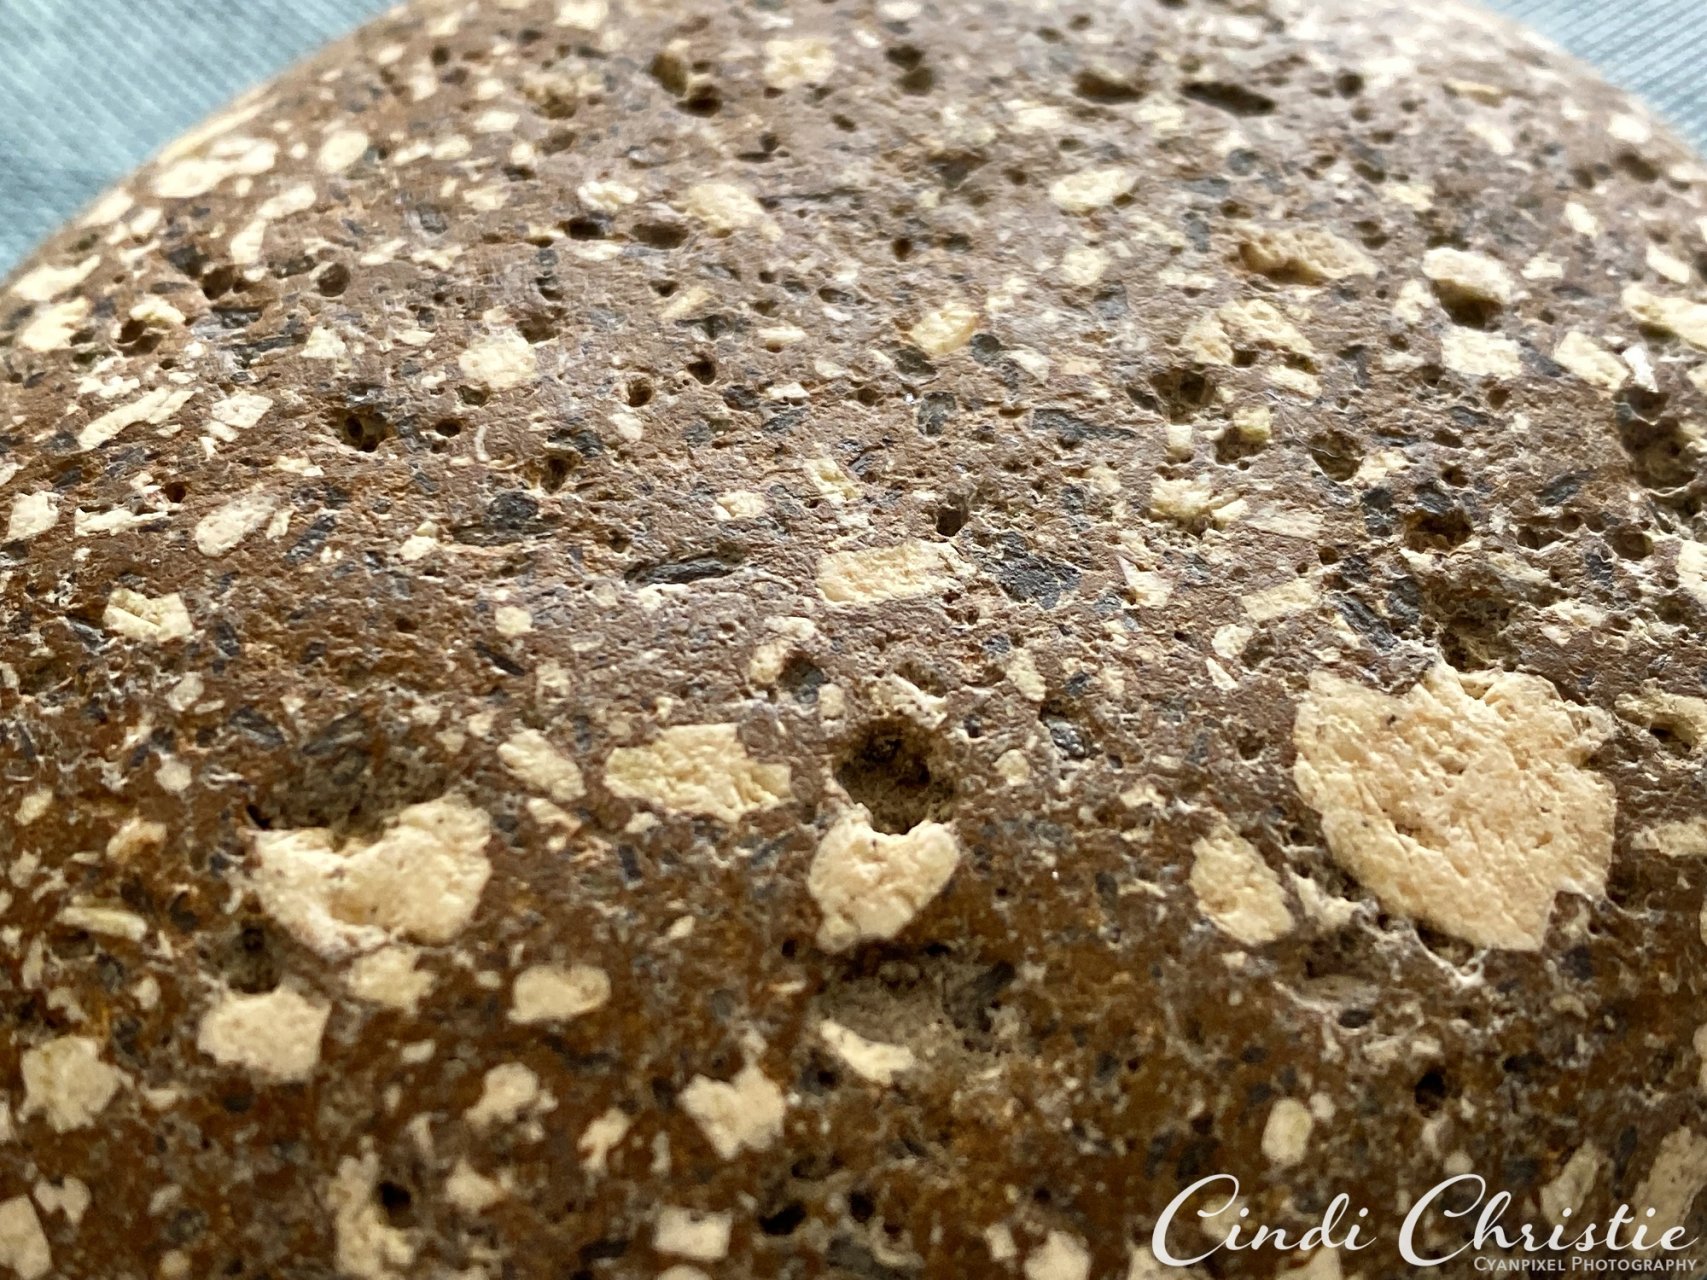 A speckled rock has heart-shaped patterns on May 11, 2020, in Salmon, Idaho.  (© 2020 Cindi Christie/Cyanpixel)